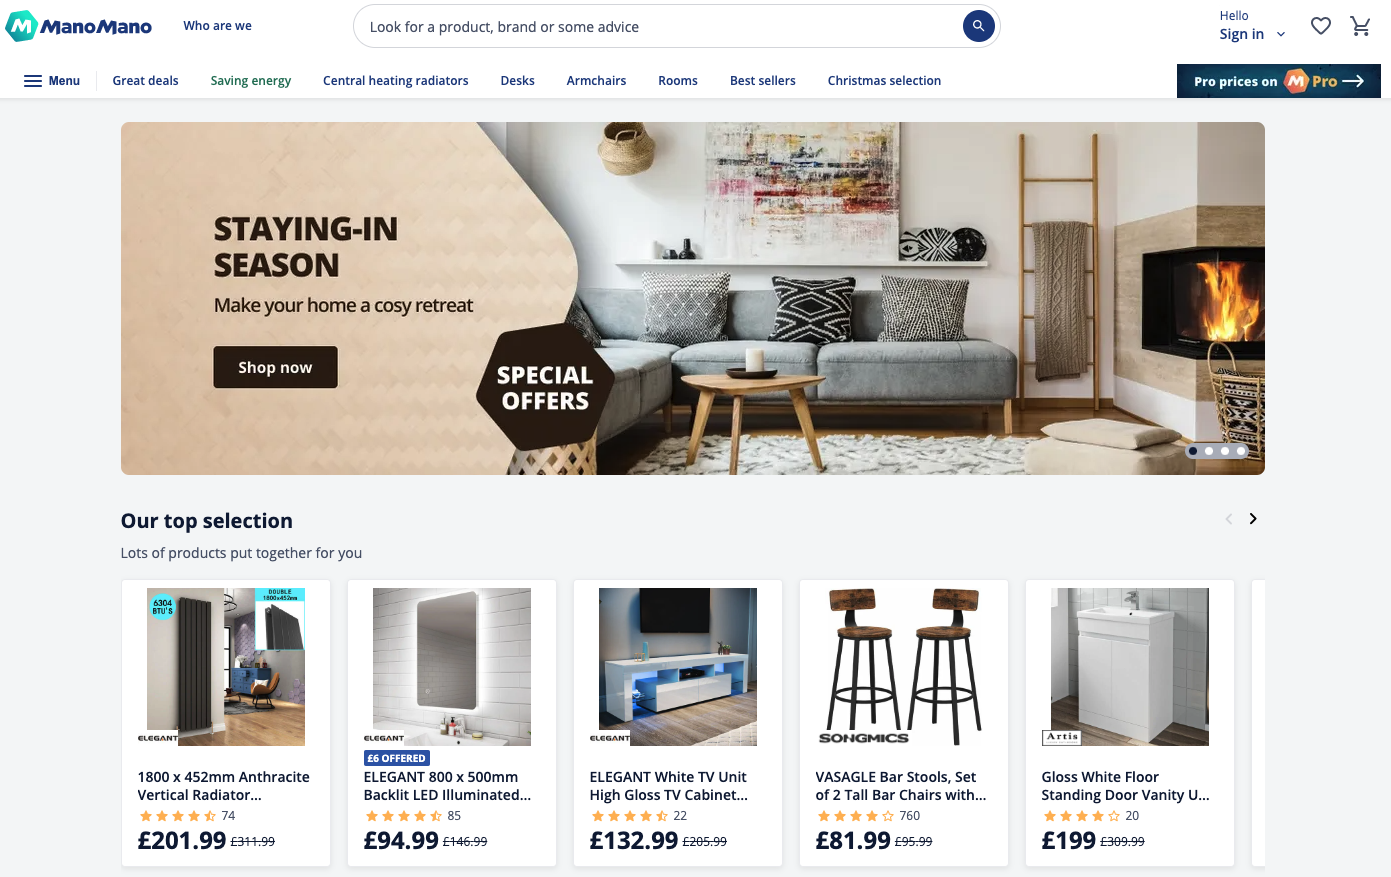 ecommerce content marketing examples